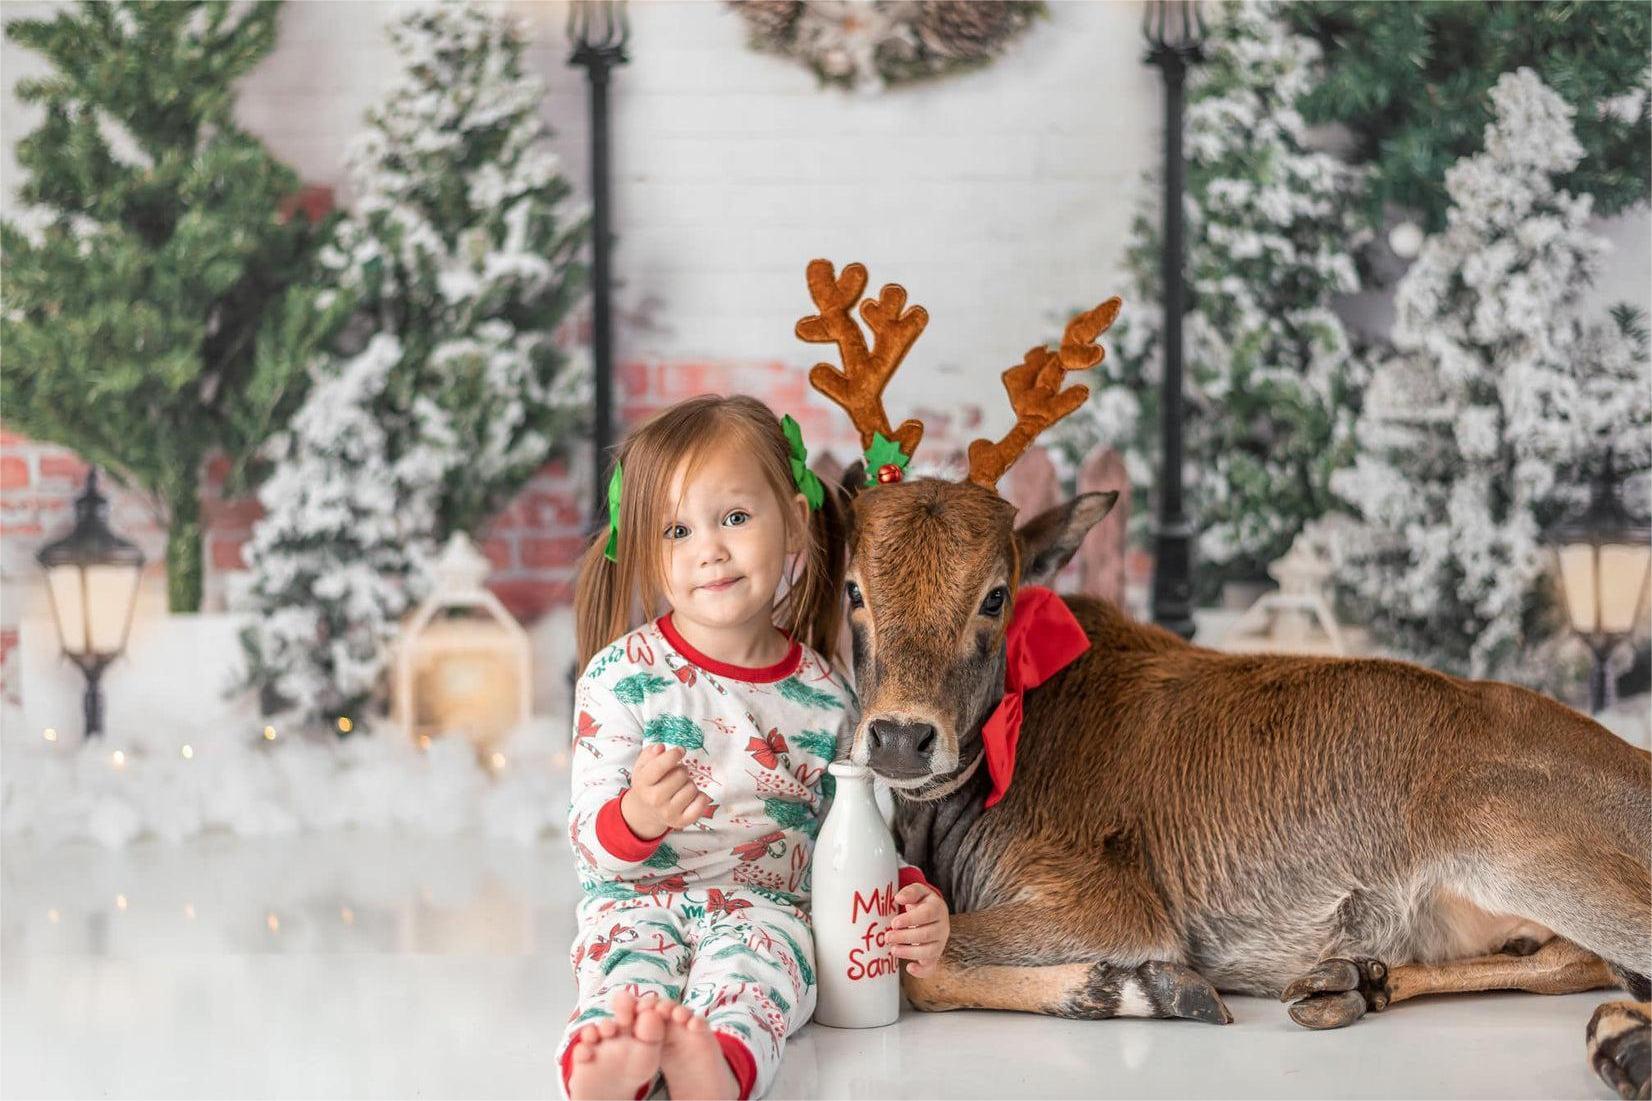 little girl's photo with Kate Xmas Backdrop Christmas Garden with Lights Designed by Emetselch